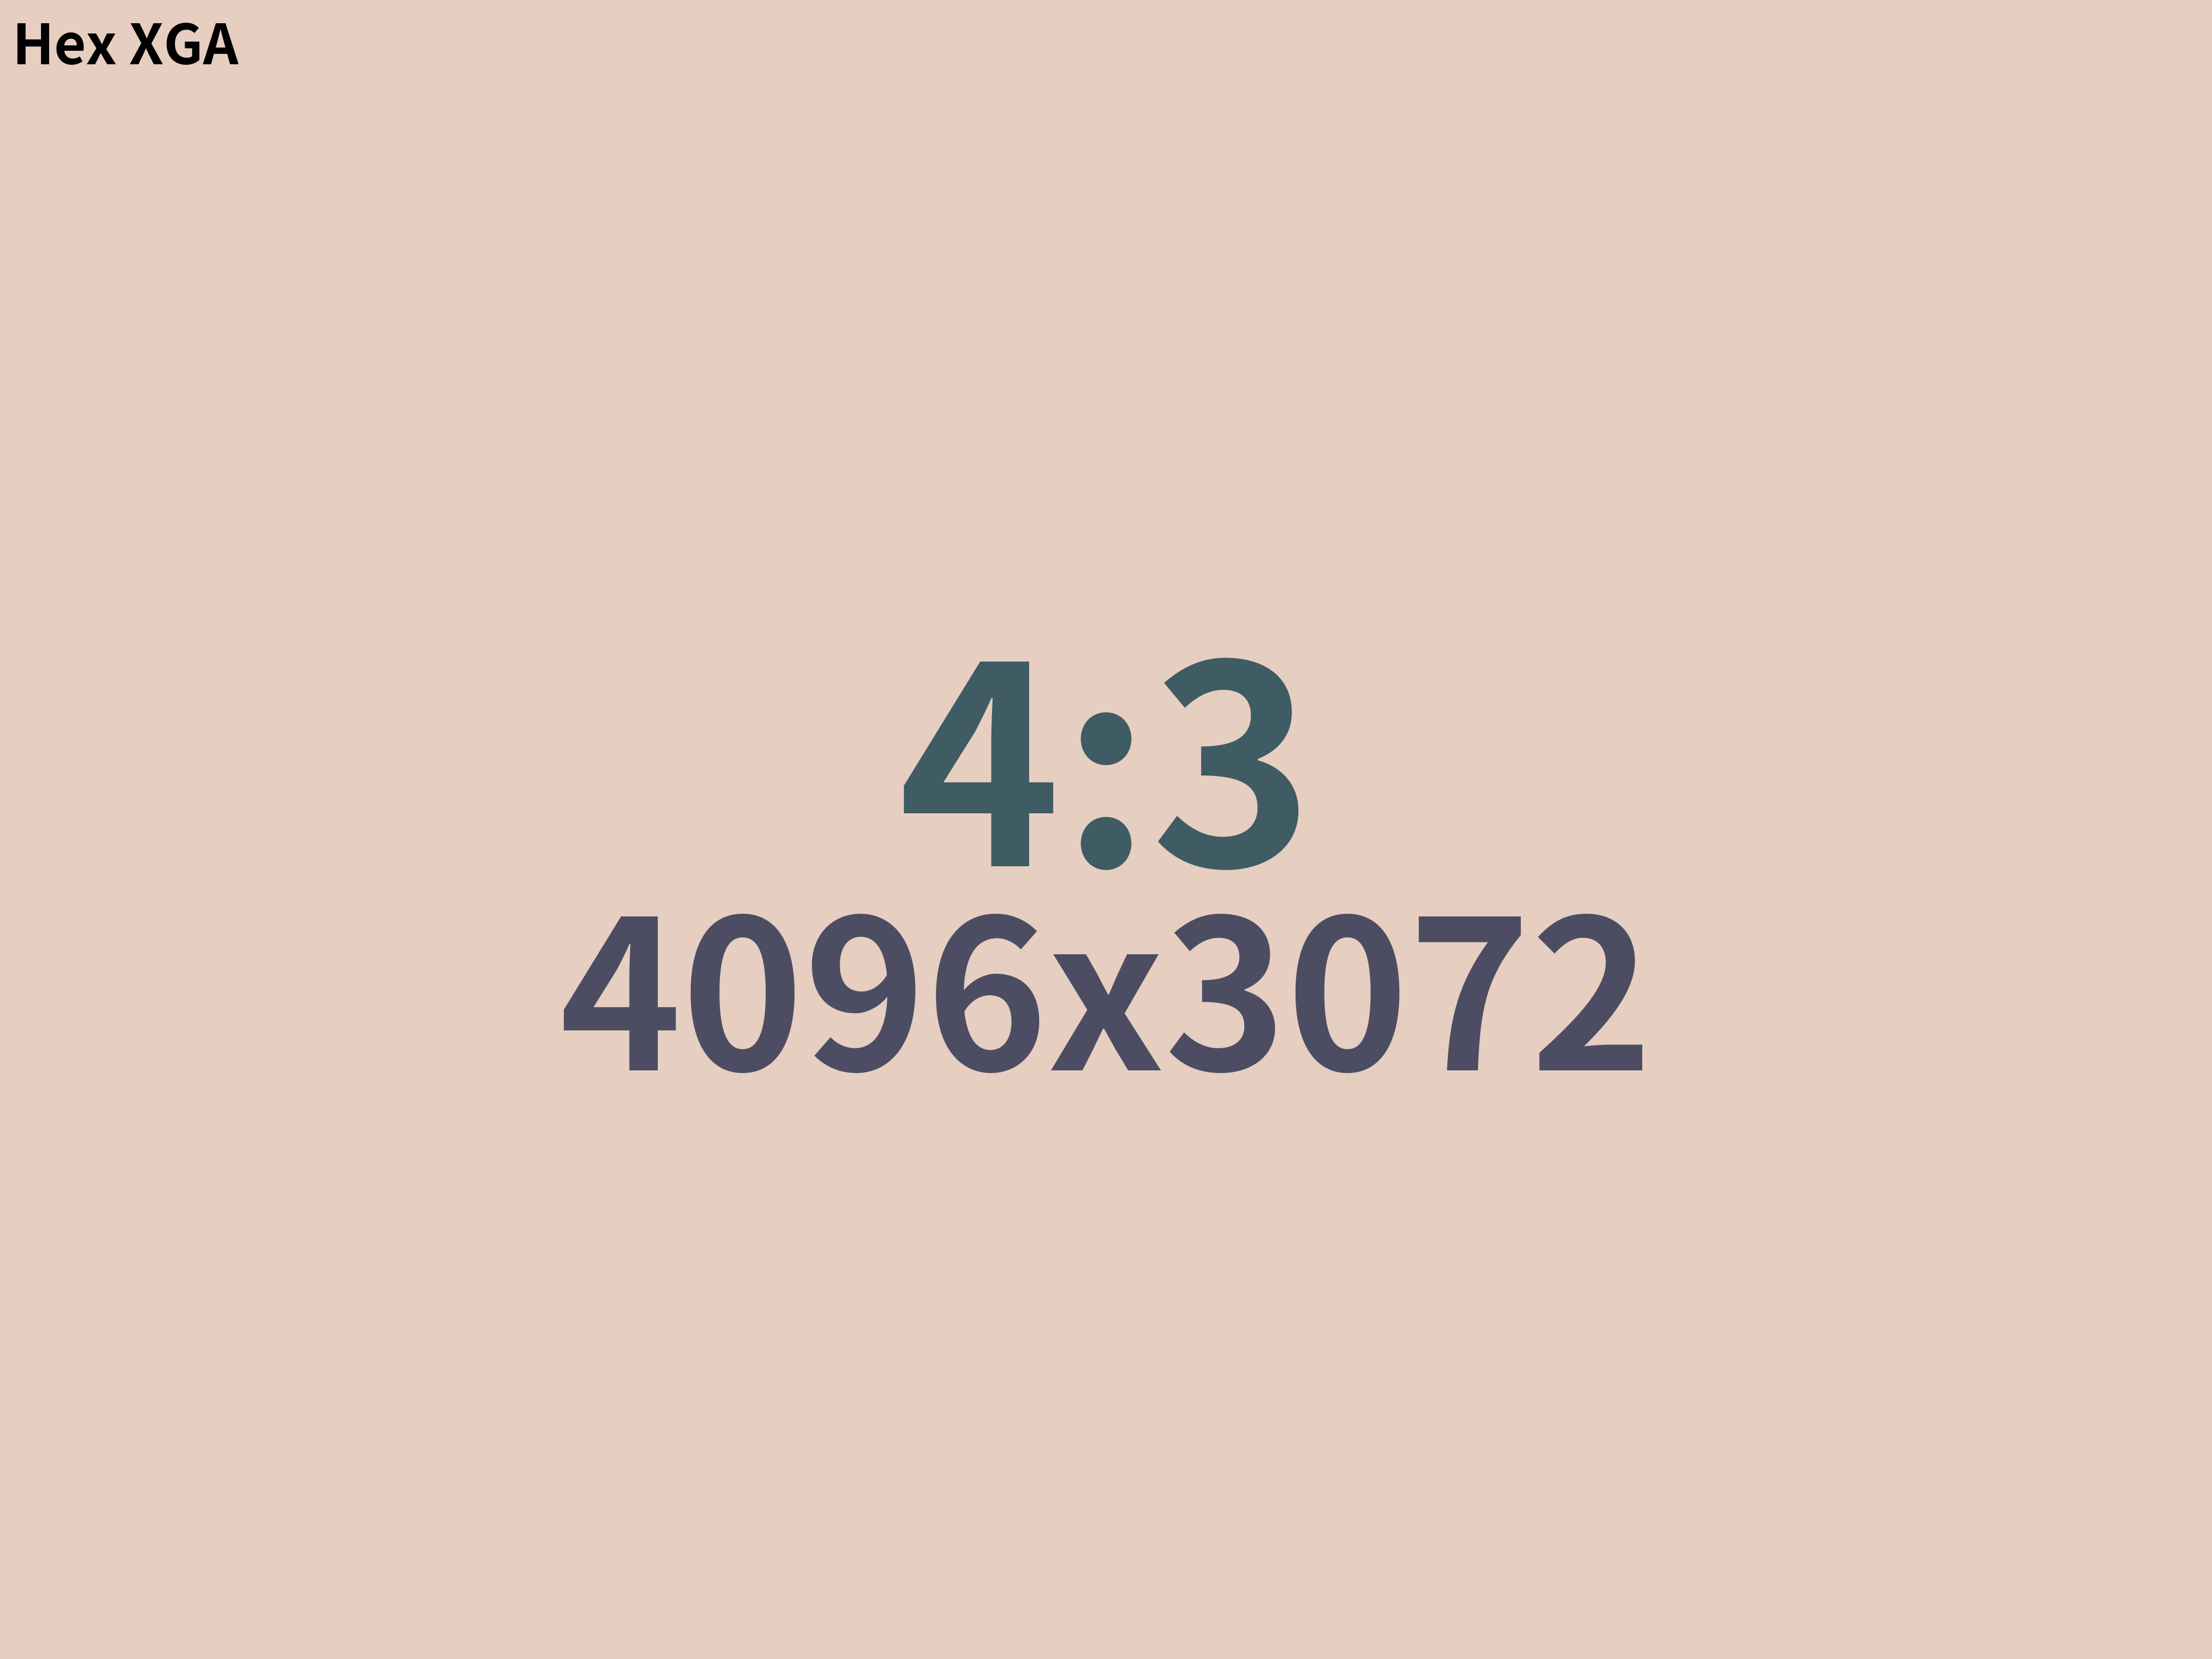 4096x3072.png